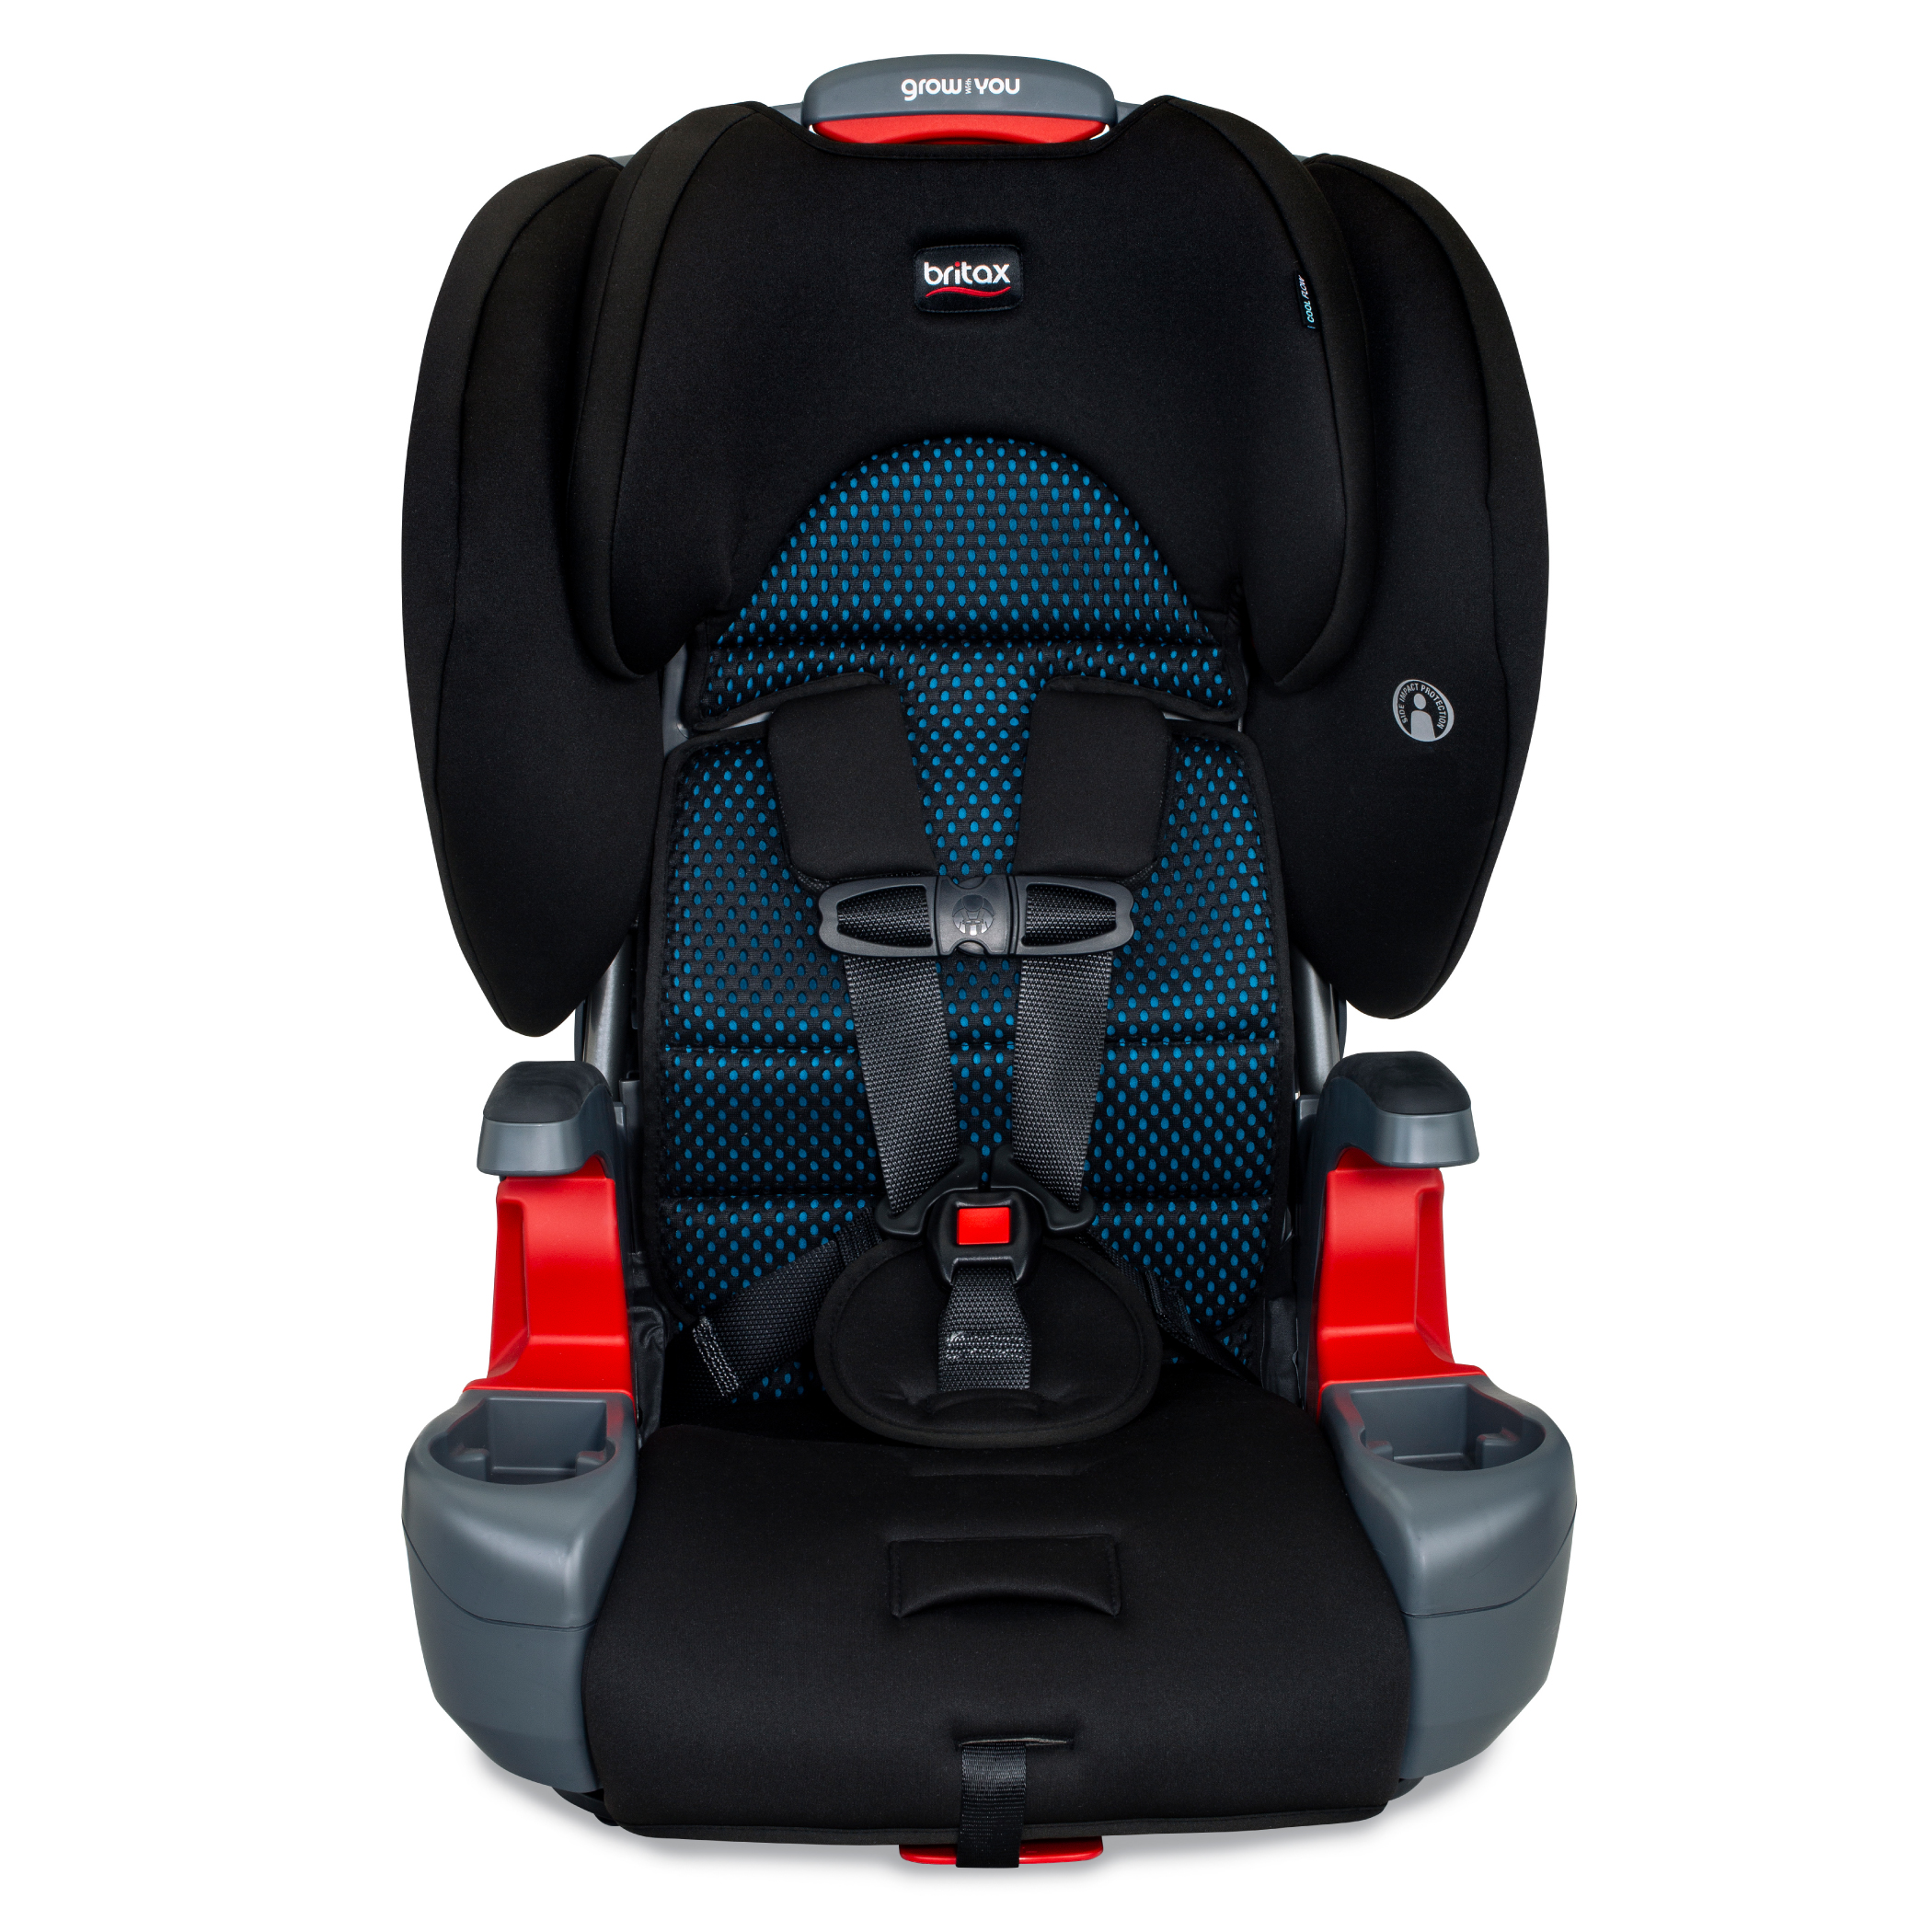 Britax Grow With You High-back Booster Car Seat, Black - image 2 of 13